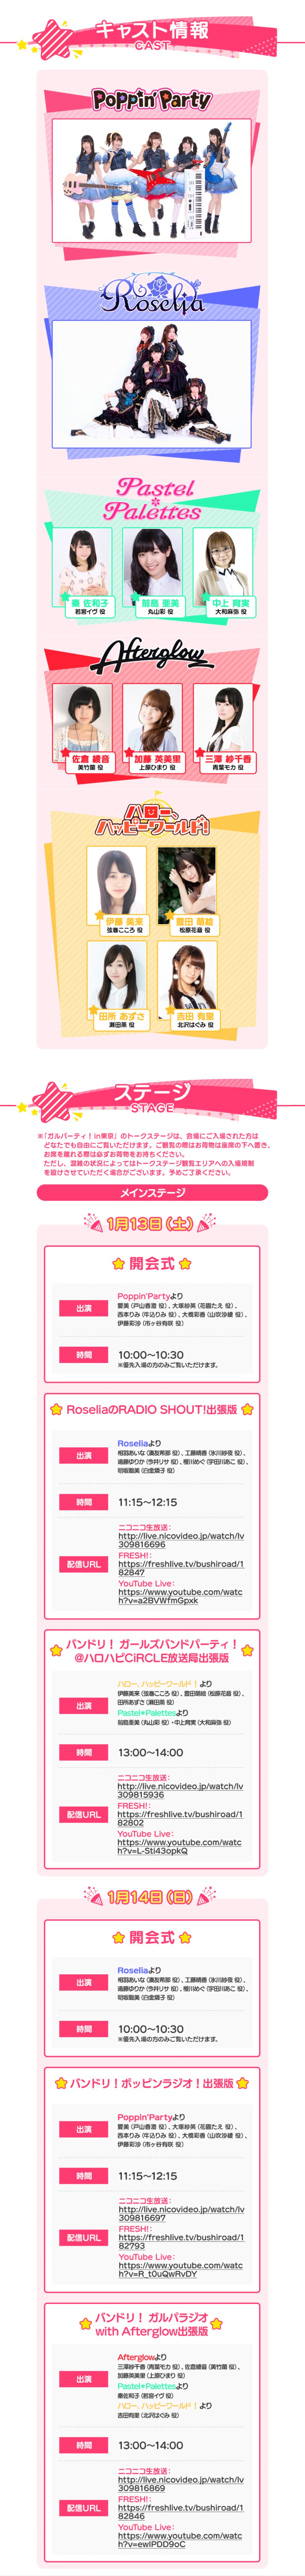 FireShot Capture 19 - ステージ ｜ ガルパライブ＆ガルパーティ！in_ - https___bang-dream.bushimo.jp_live_party_stage.png